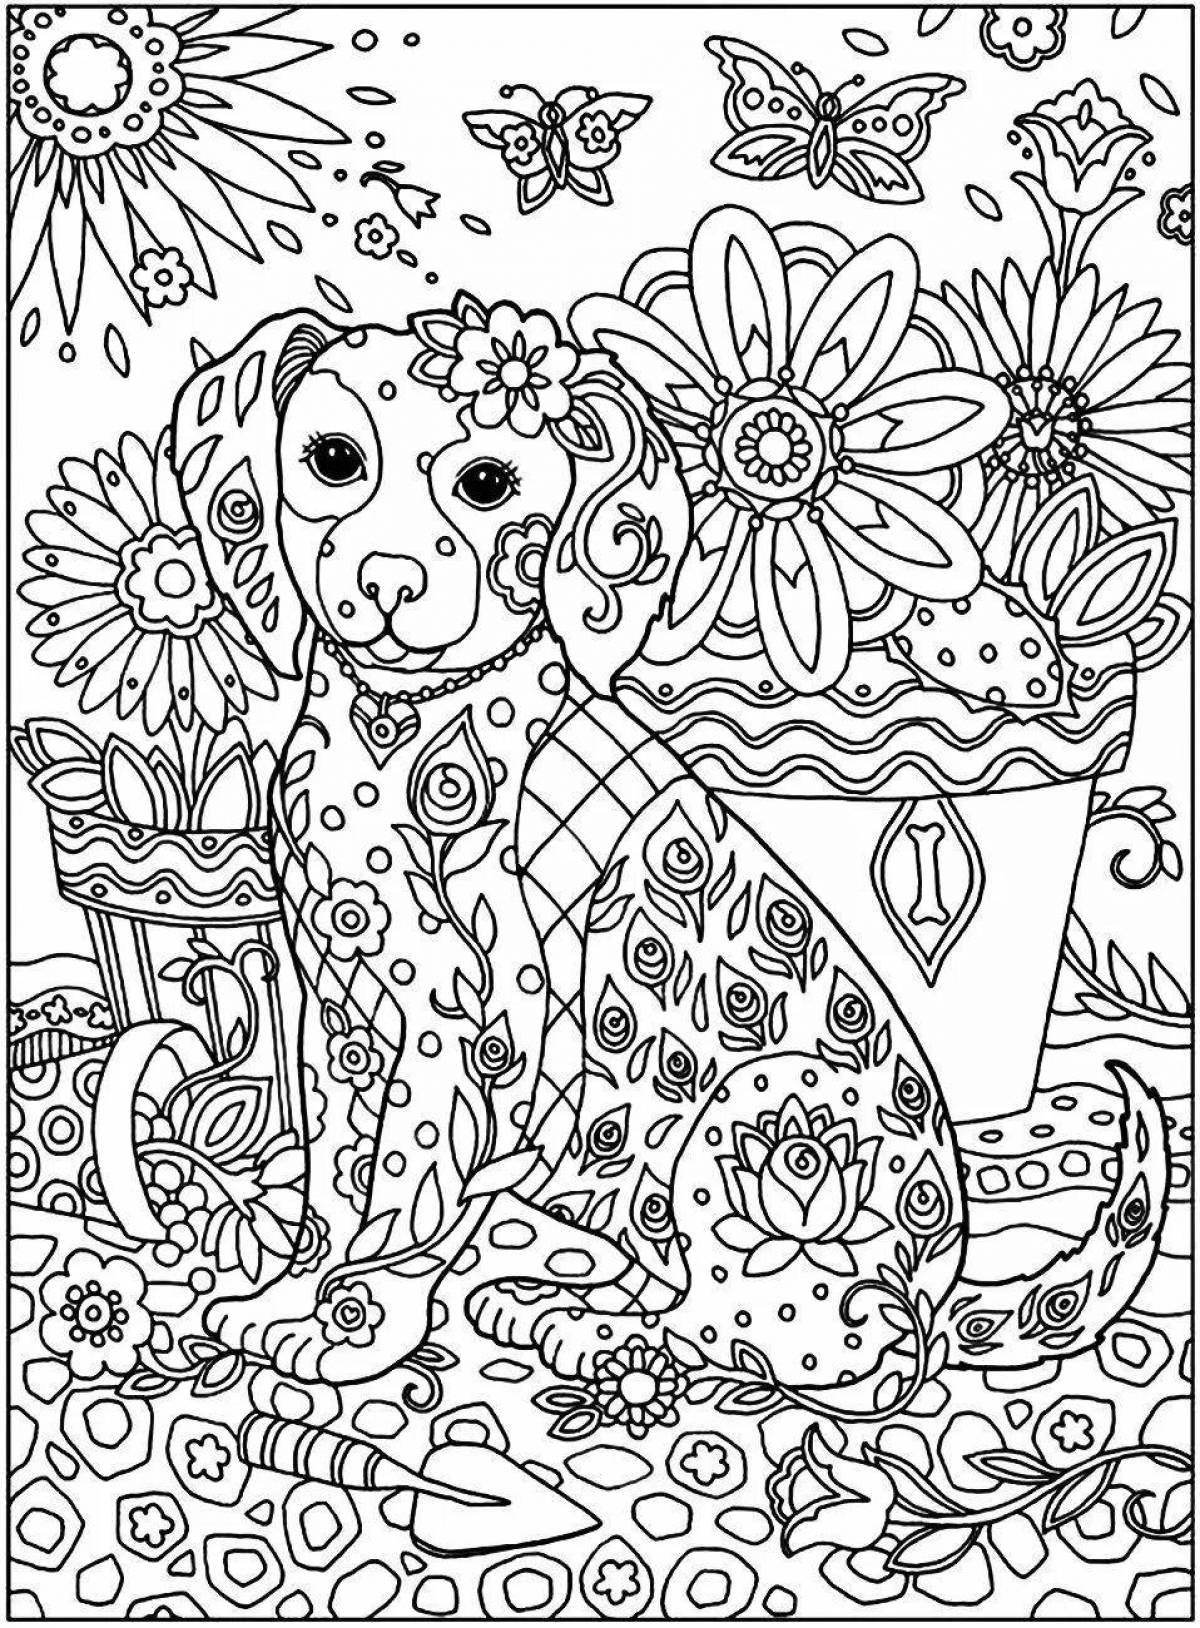 Fun anti-stress coloring book for children 7 years old